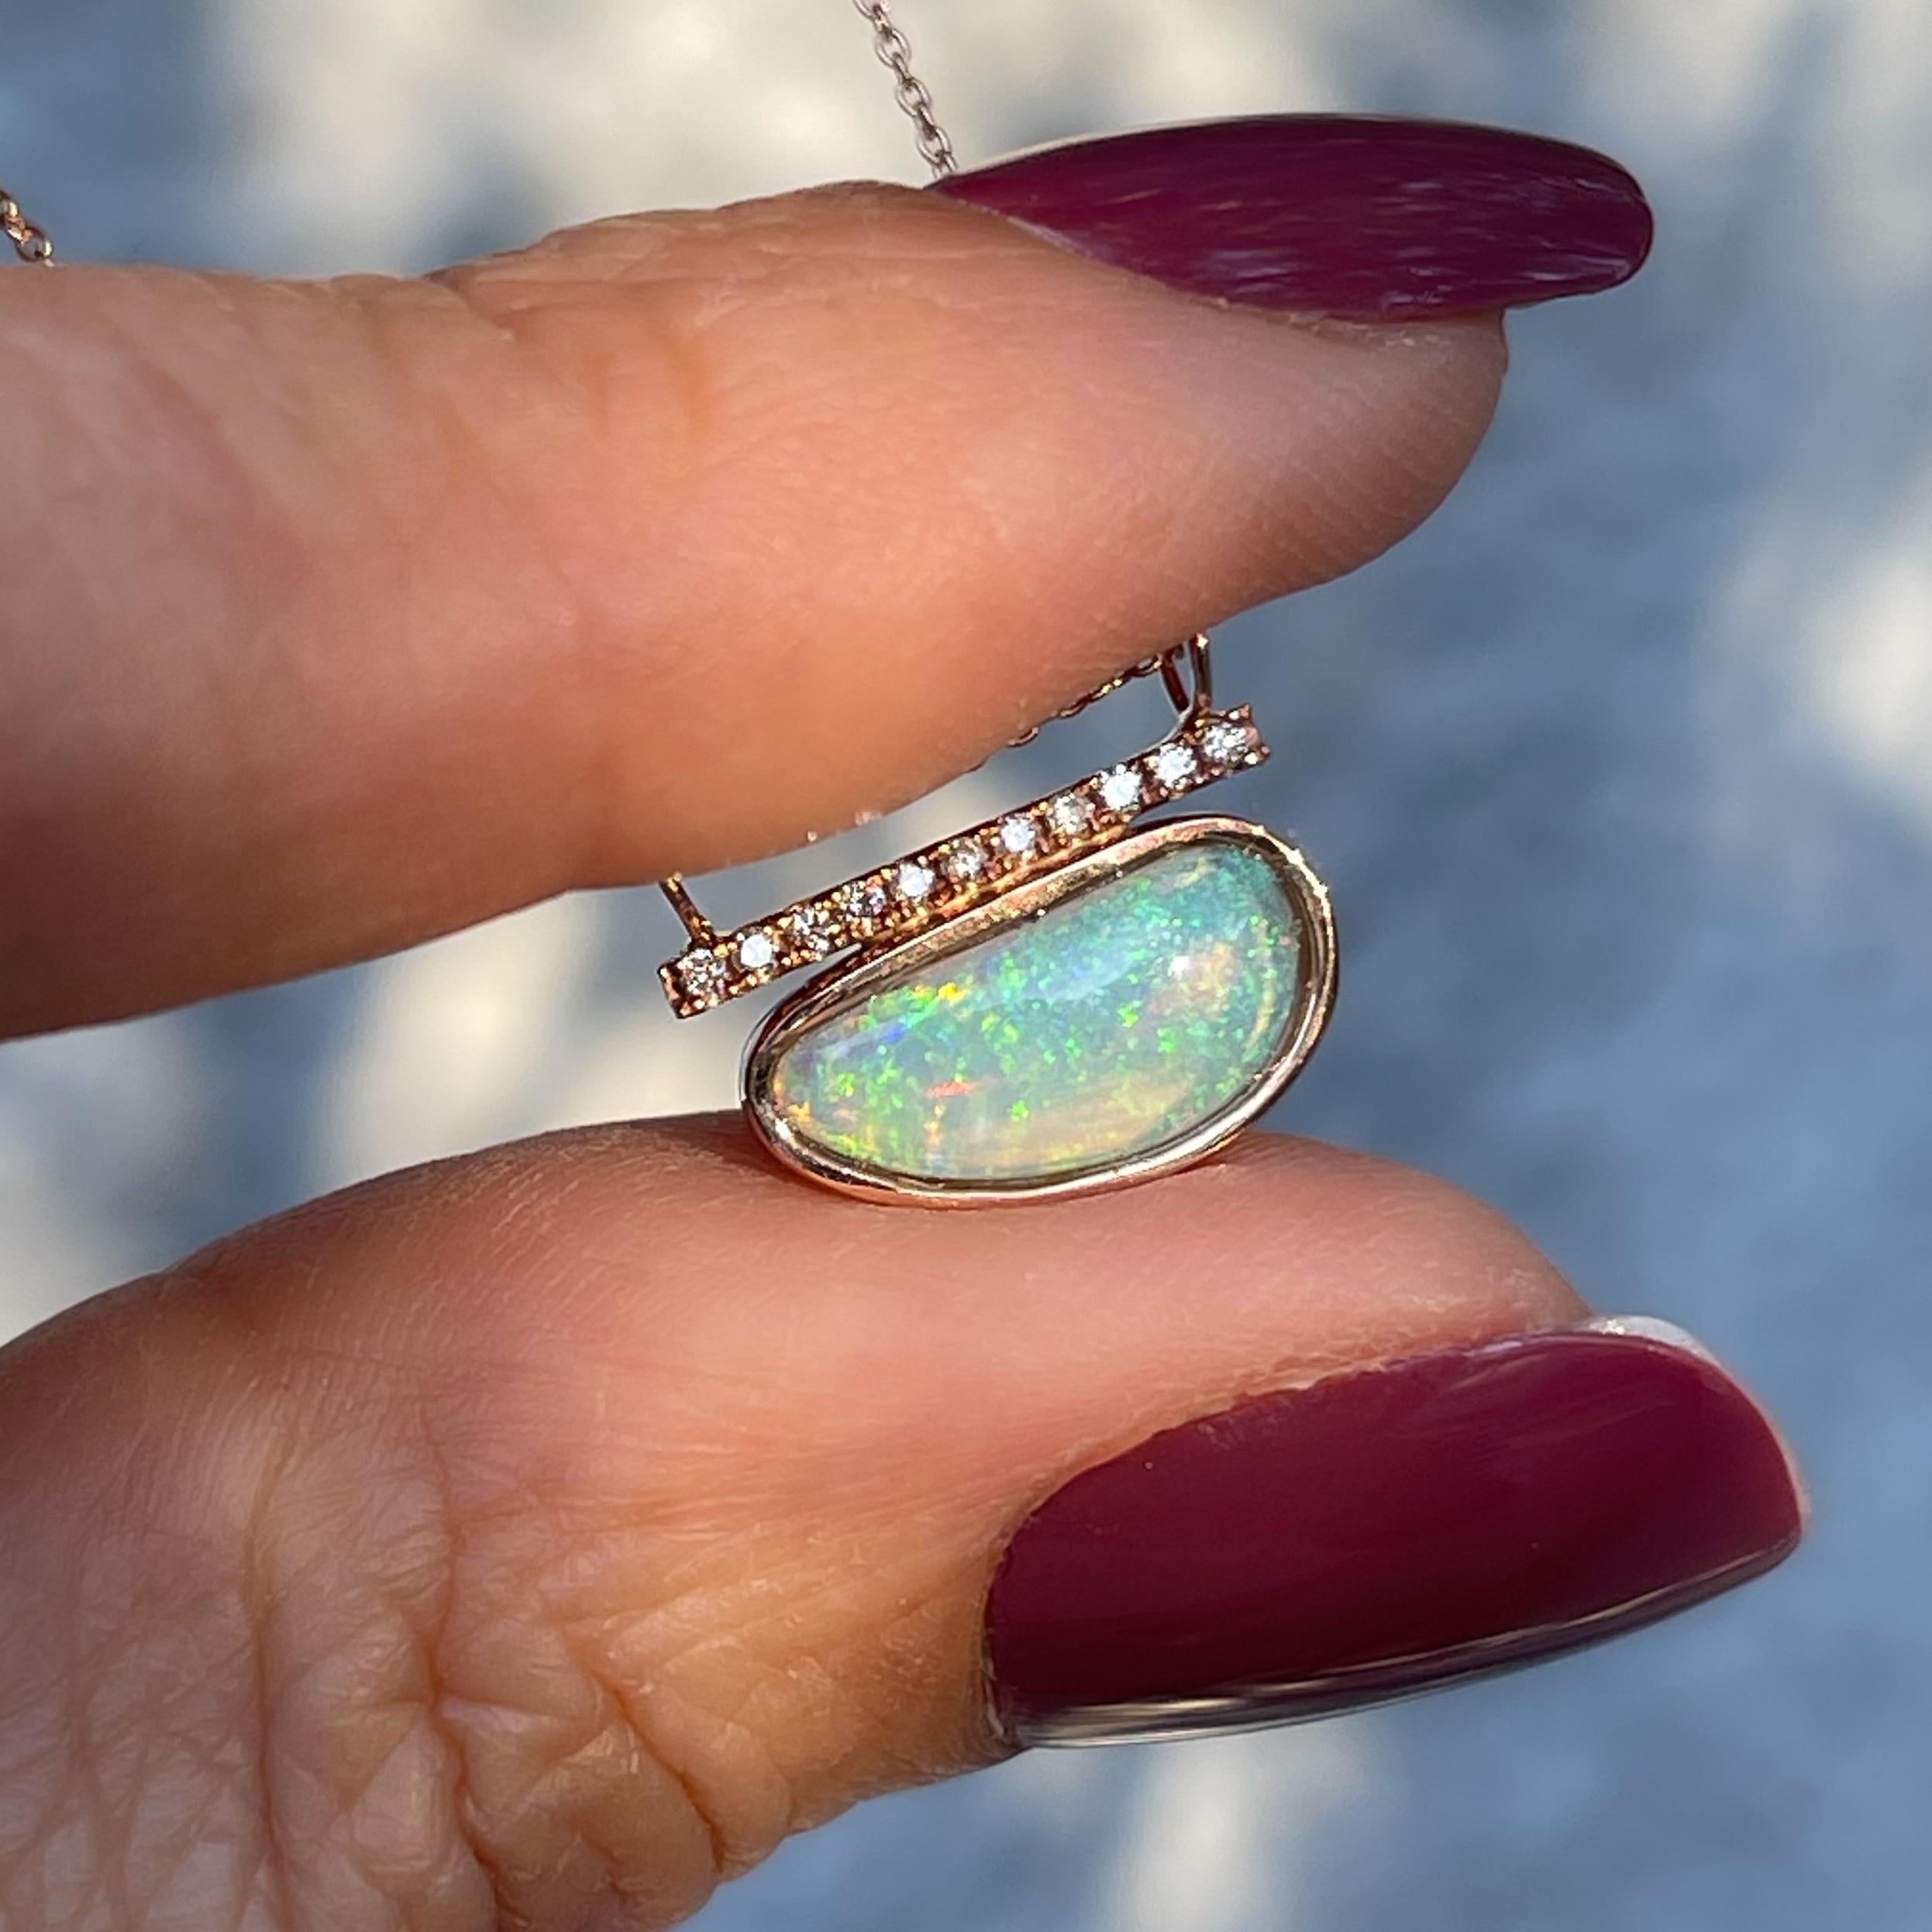 A breathtaking green opal shimmers with charm in the Head in the Clouds Crystal Opal Necklace No. 16.  The crystal opal dons a delicate pinfire pattern drawing on childhood memories of fairy dust and enchantment.  Through this entrancing green